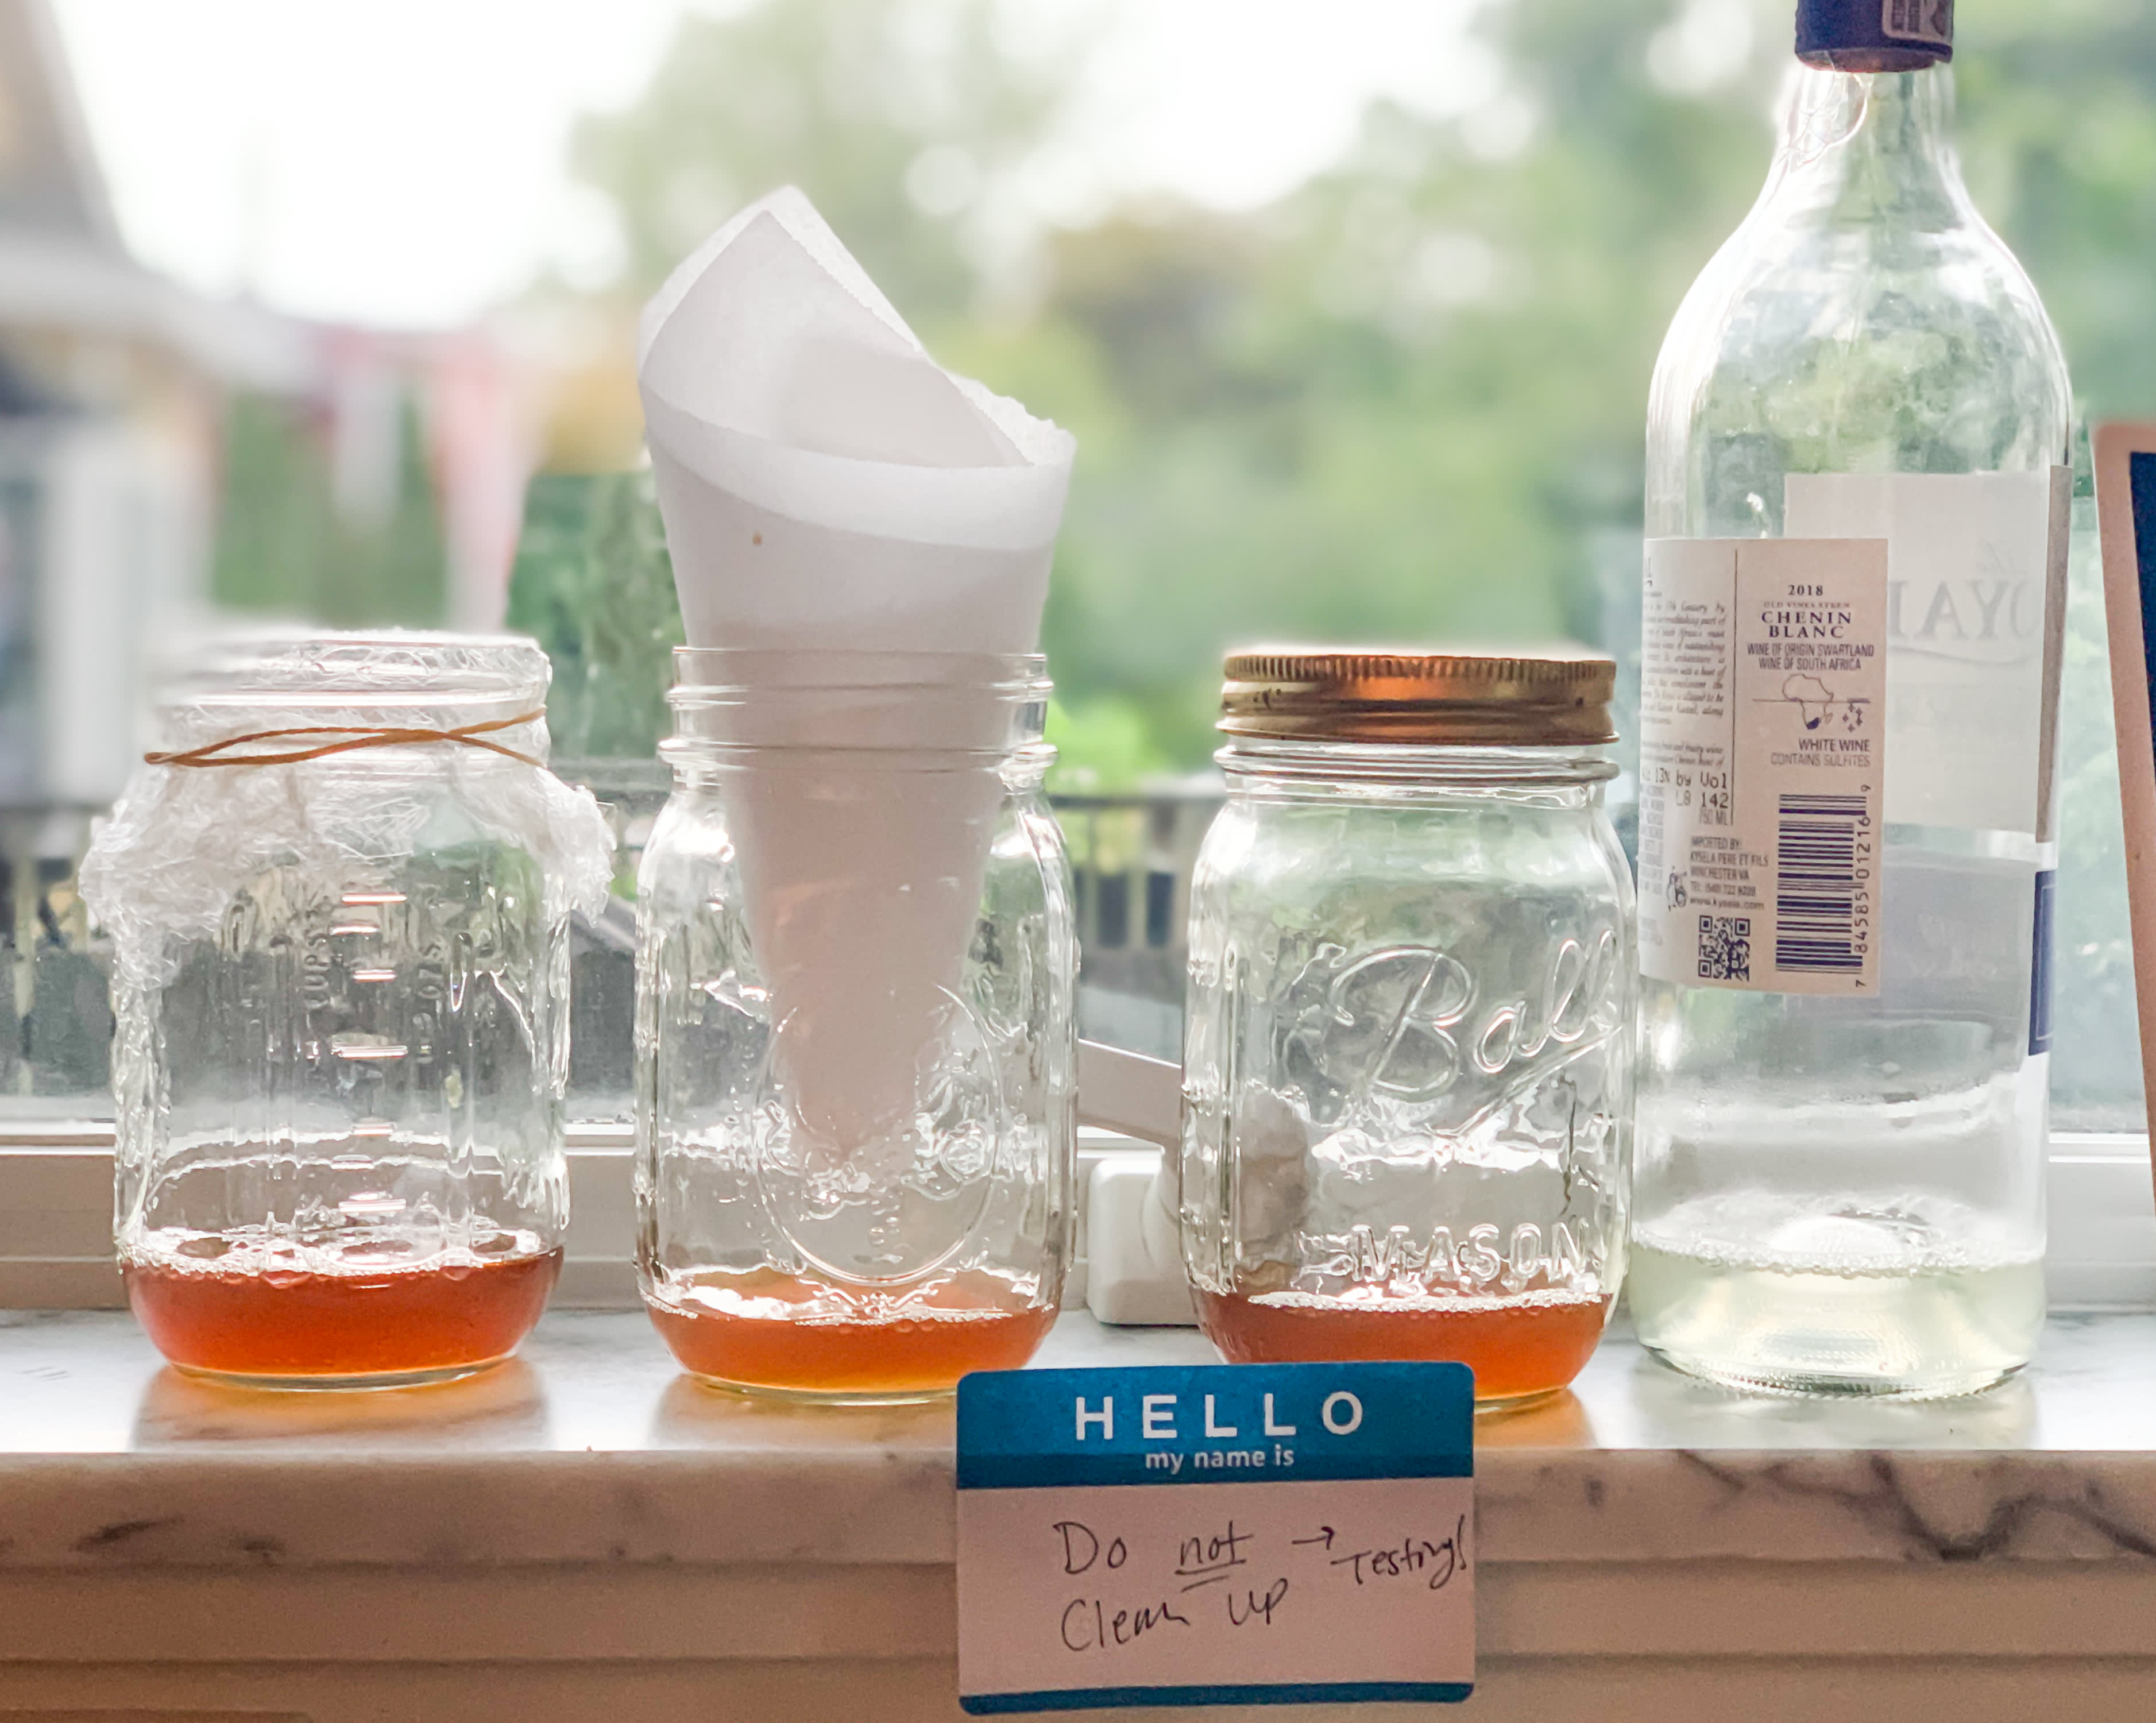 I Tested 4 Zero-Cost Methods for Trapping Fruit Flies in the